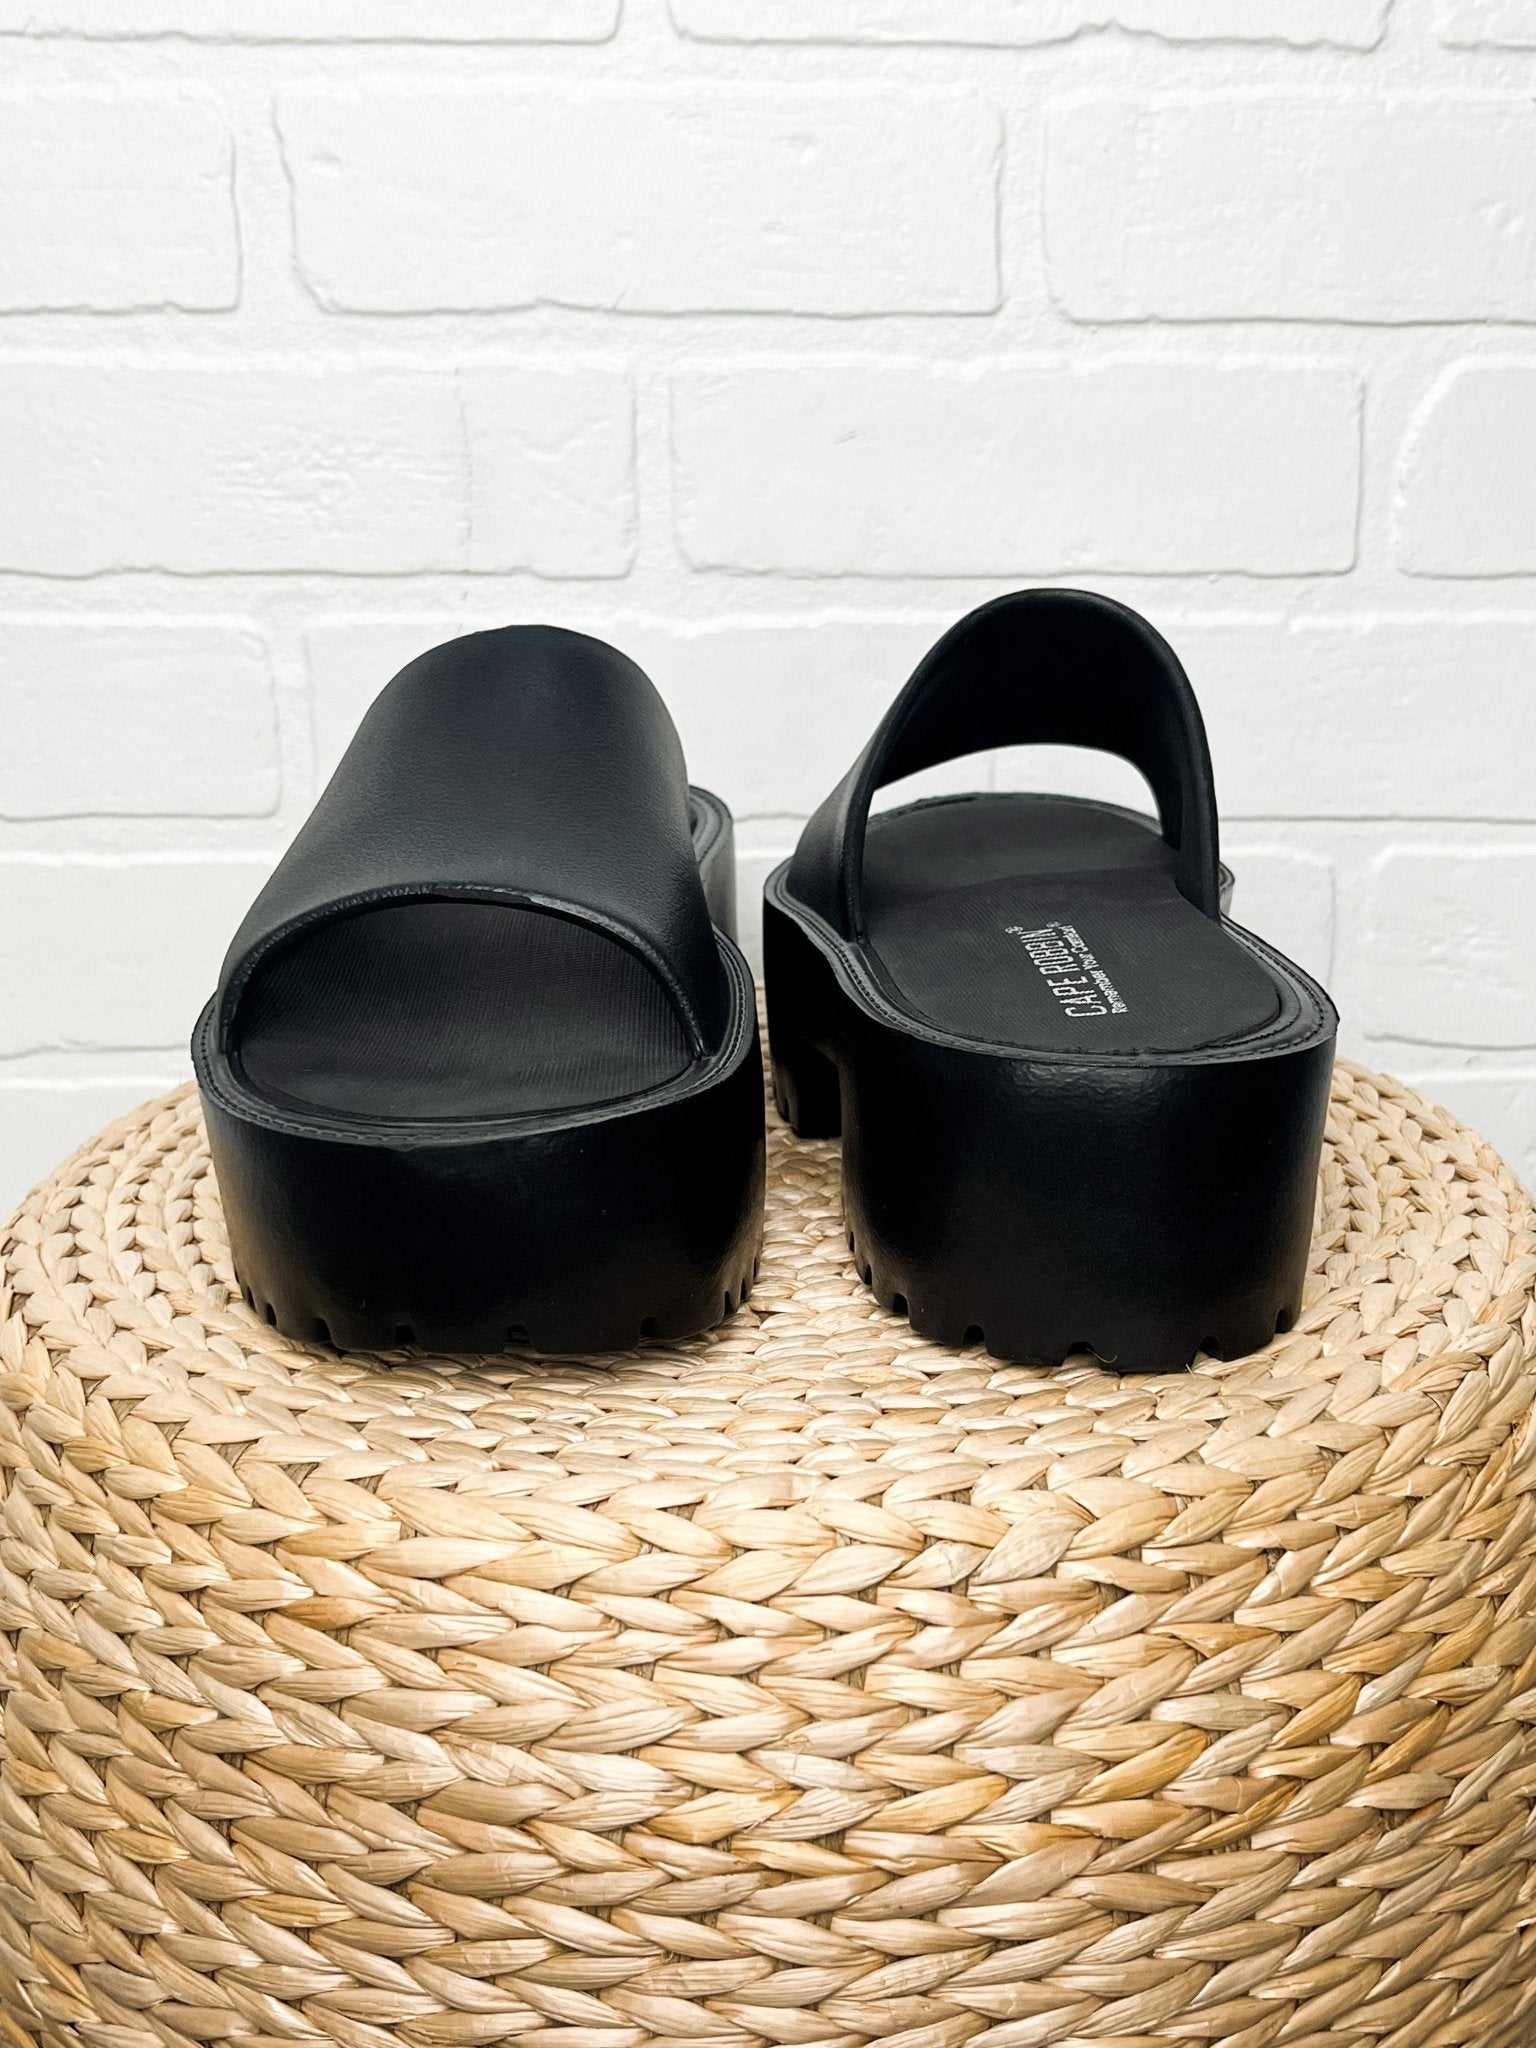 Oriya chunky sandal black - Affordable shoes - Boutique Shoes at Lush Fashion Lounge Boutique in Oklahoma City